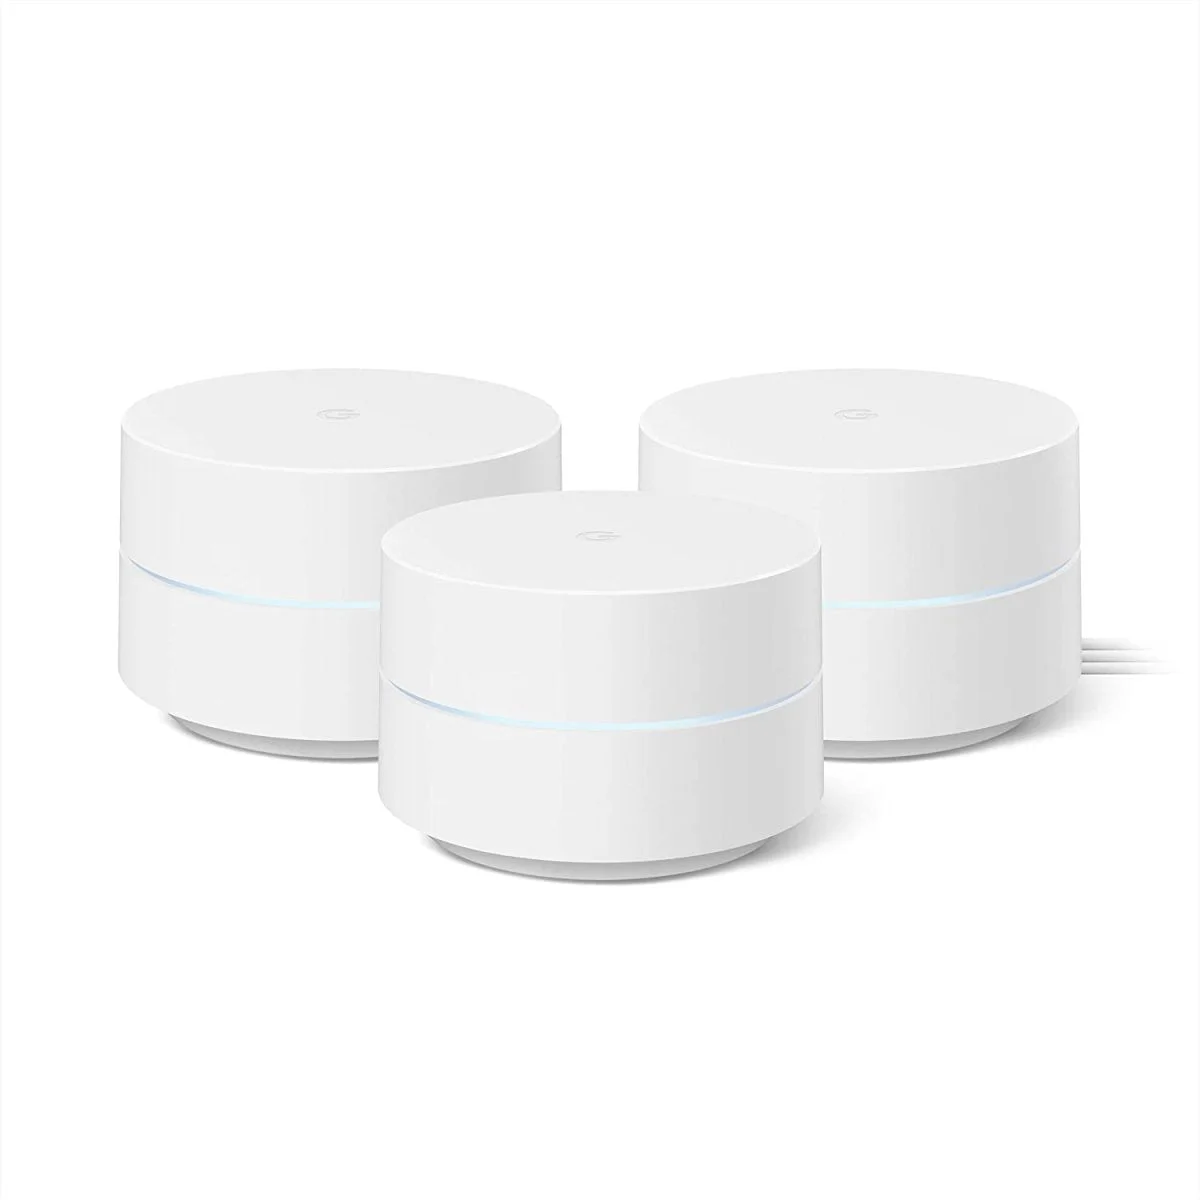 Google Nest Wifi Ga02434-Us Whole Home Wi-Fi System 3-Pack - White